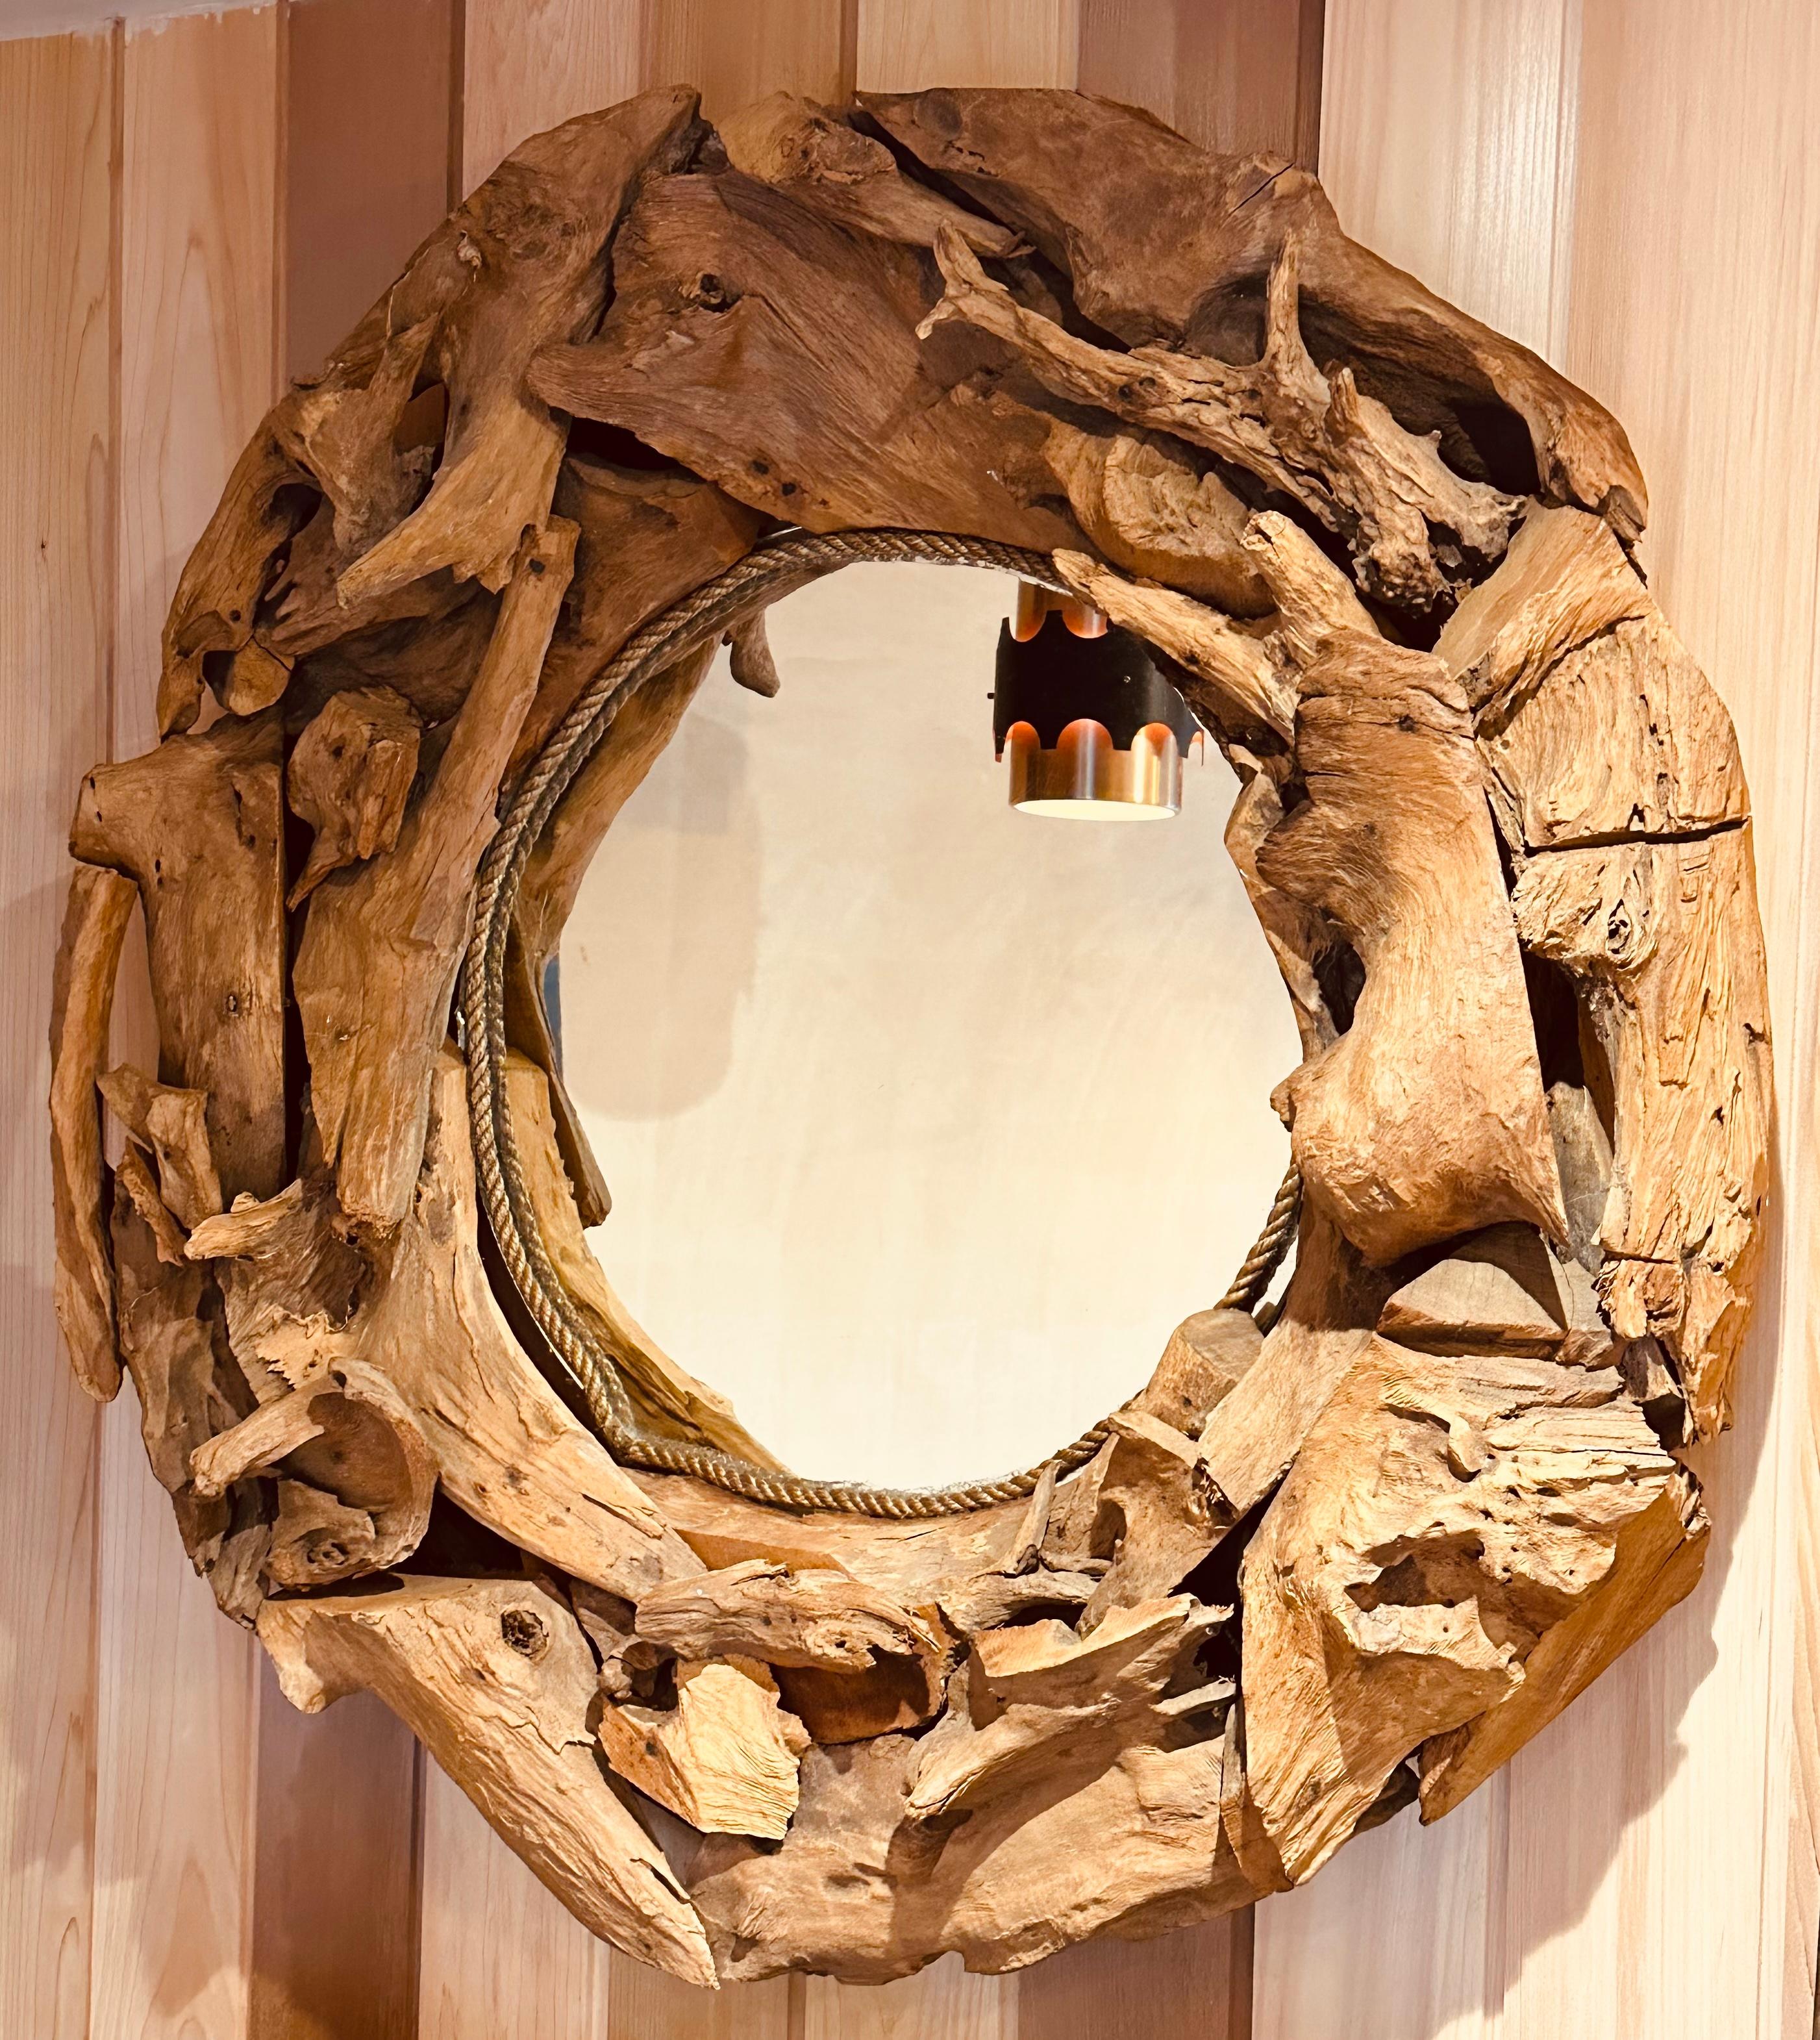 A large, well-made, and very heavy, vintage driftwood framed glass wall mirror. The frame is constructed from Individual pieces of driftwood tree root that have been handcrafted into a textured and rustic design surrounding the glass mirror.  A